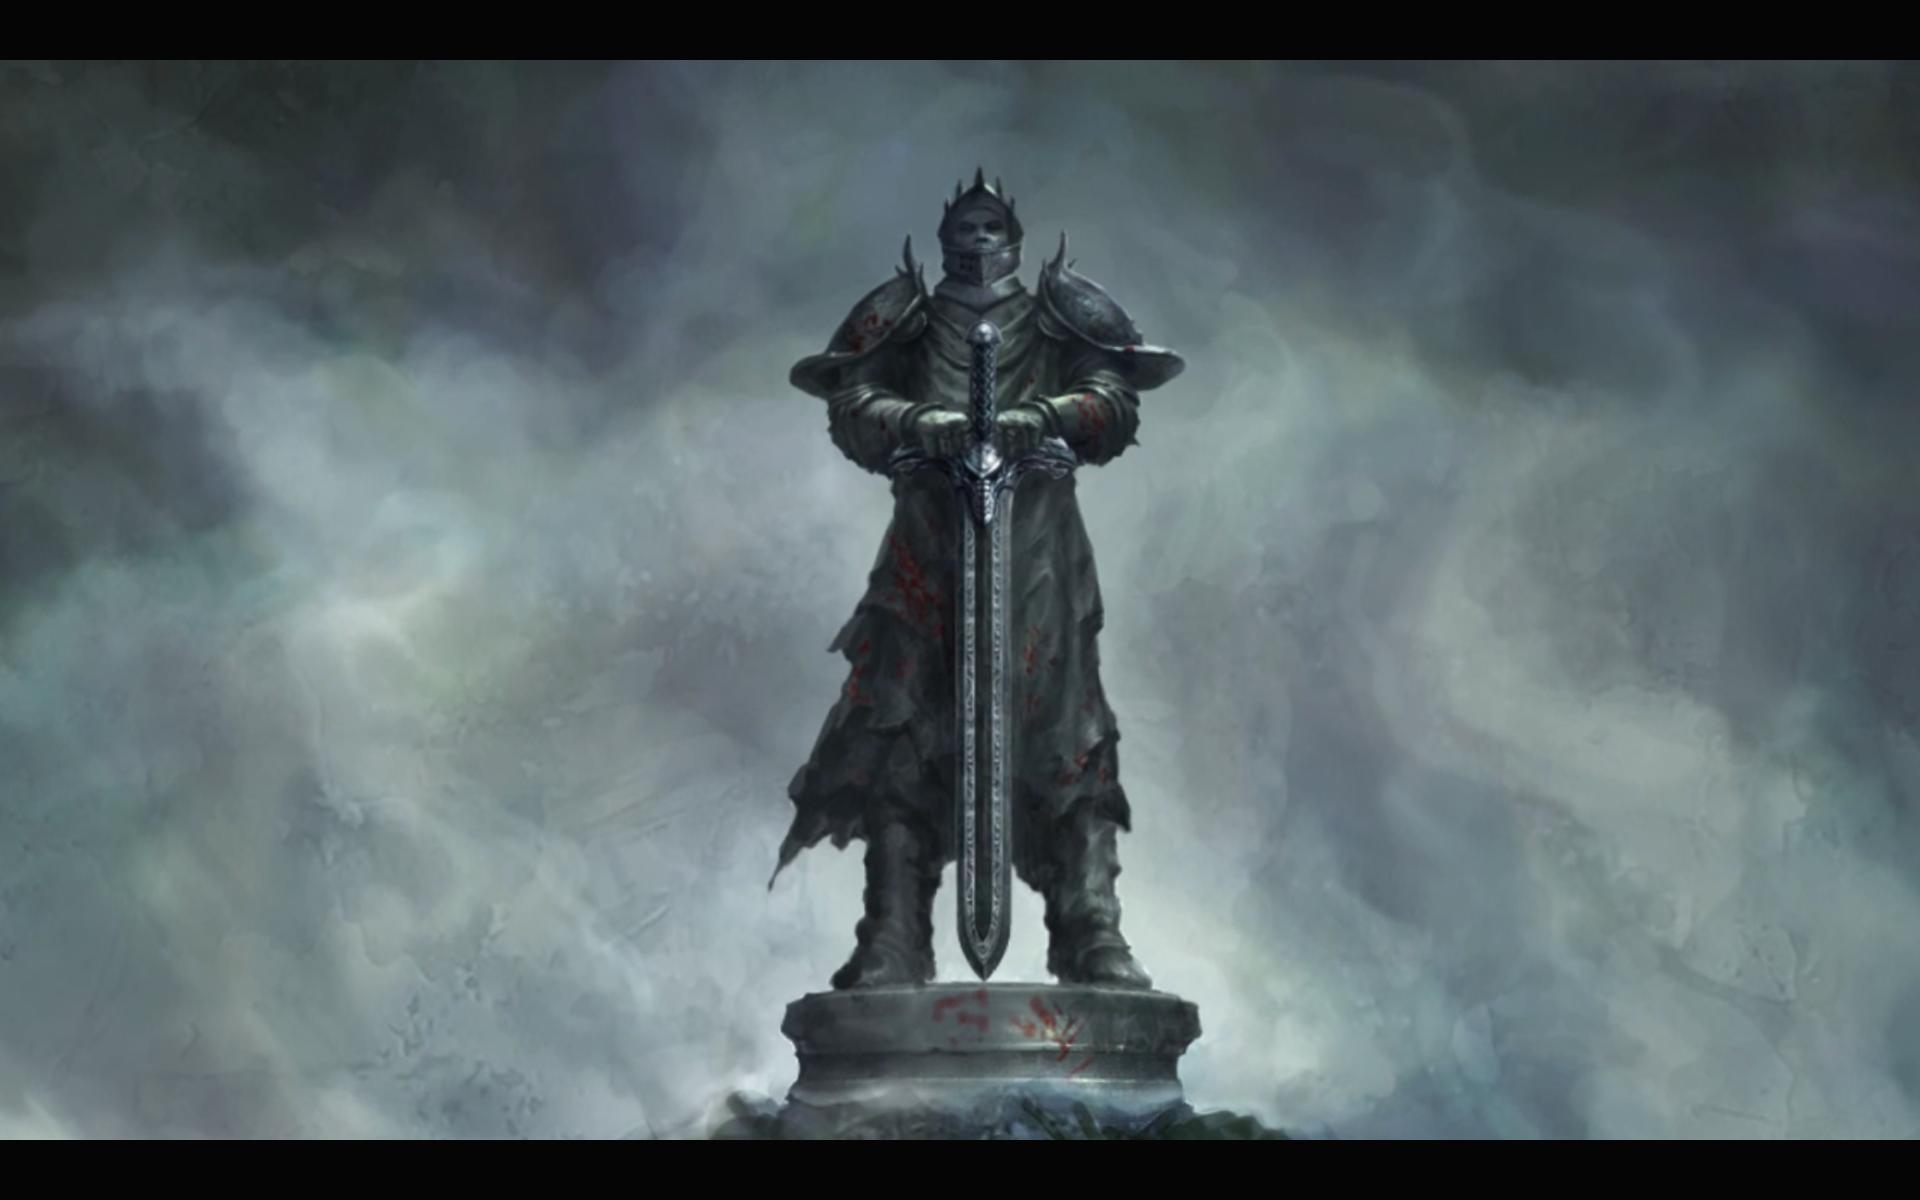 Knight Medieval Mist Noble Royalty Statue Stone Sword Warrior HD